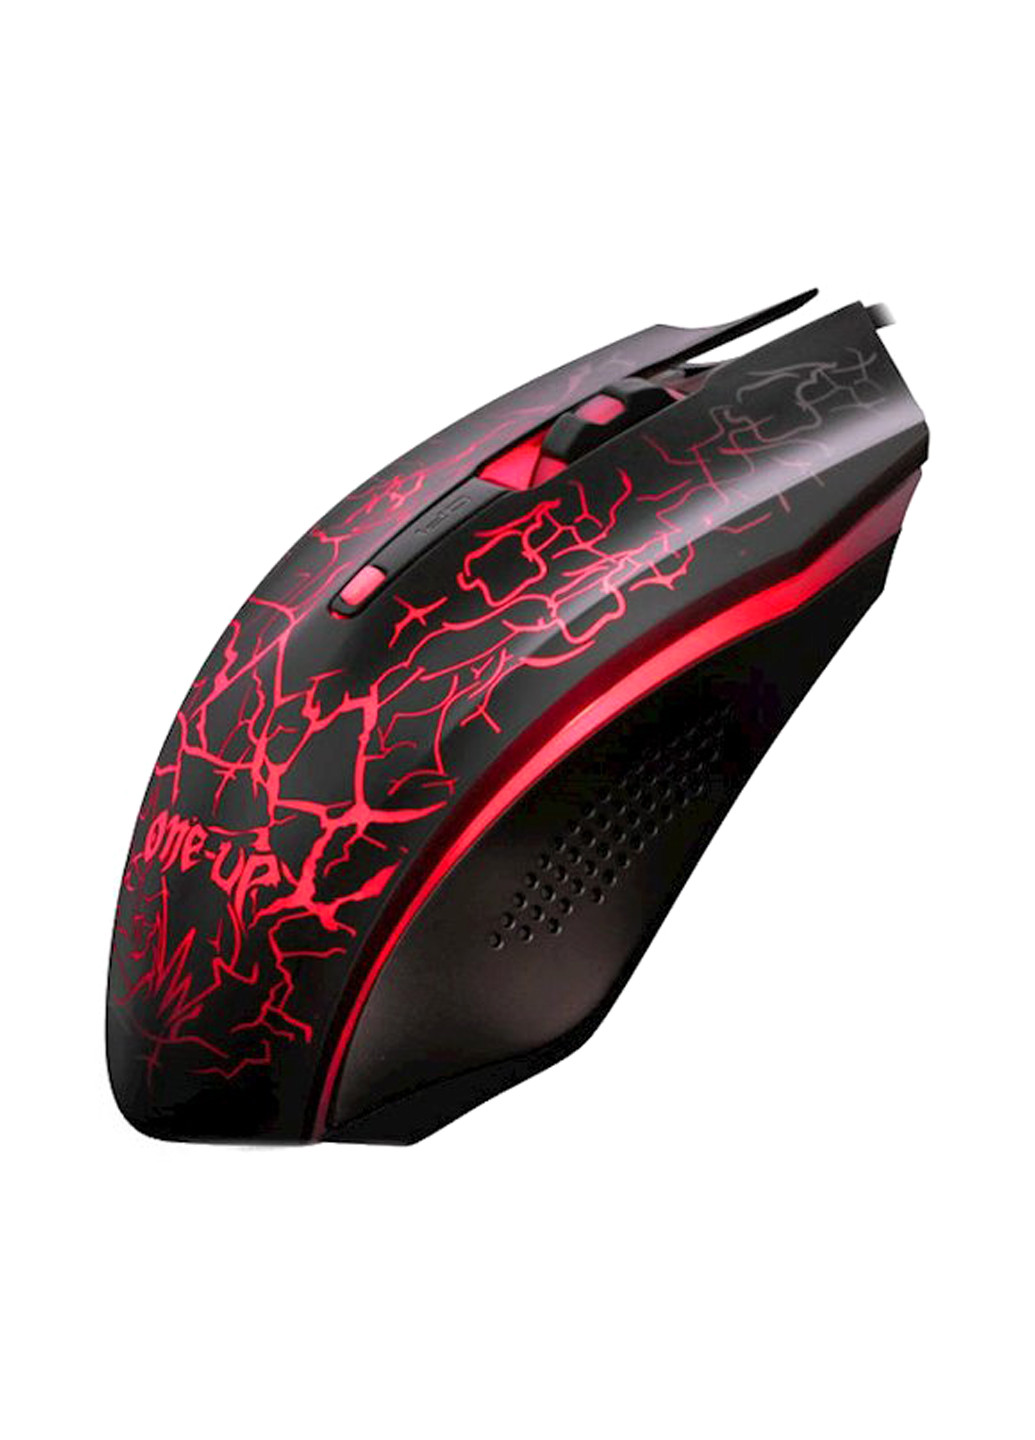 Мышь Gaming mouse ONE-UP 790gt (135036792)